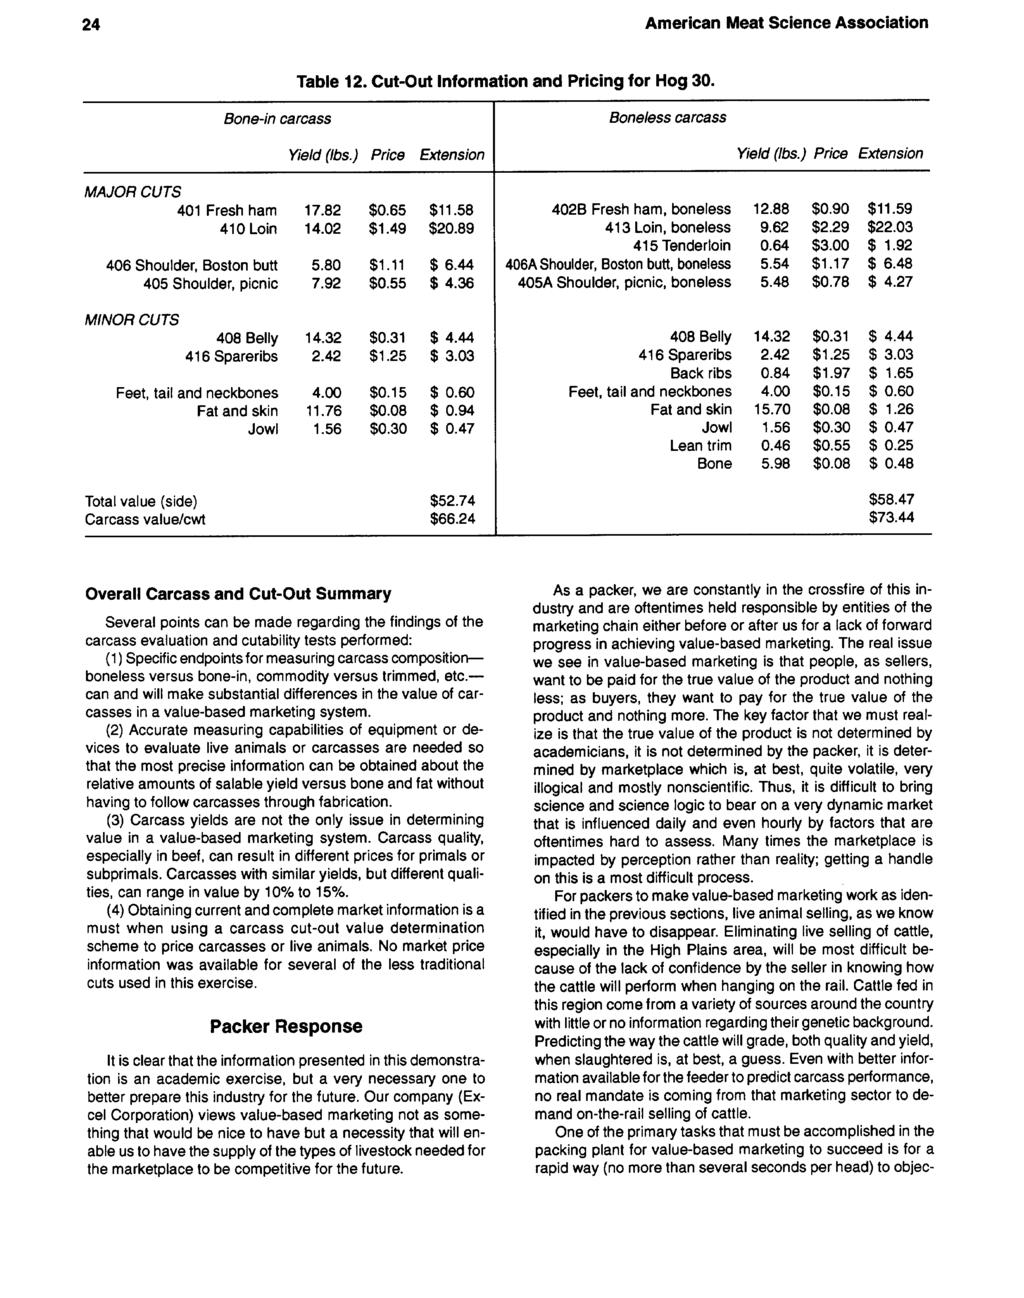 American Meat Science Association Table 12. Cut-Out Information and Pricing for Hog 30. -in carcass less carcass Yield (Ibs.) Price Extension MAJOR CUTS 401 Fresh ham 17.82 $0.65 $11.58 410 Loin 14.